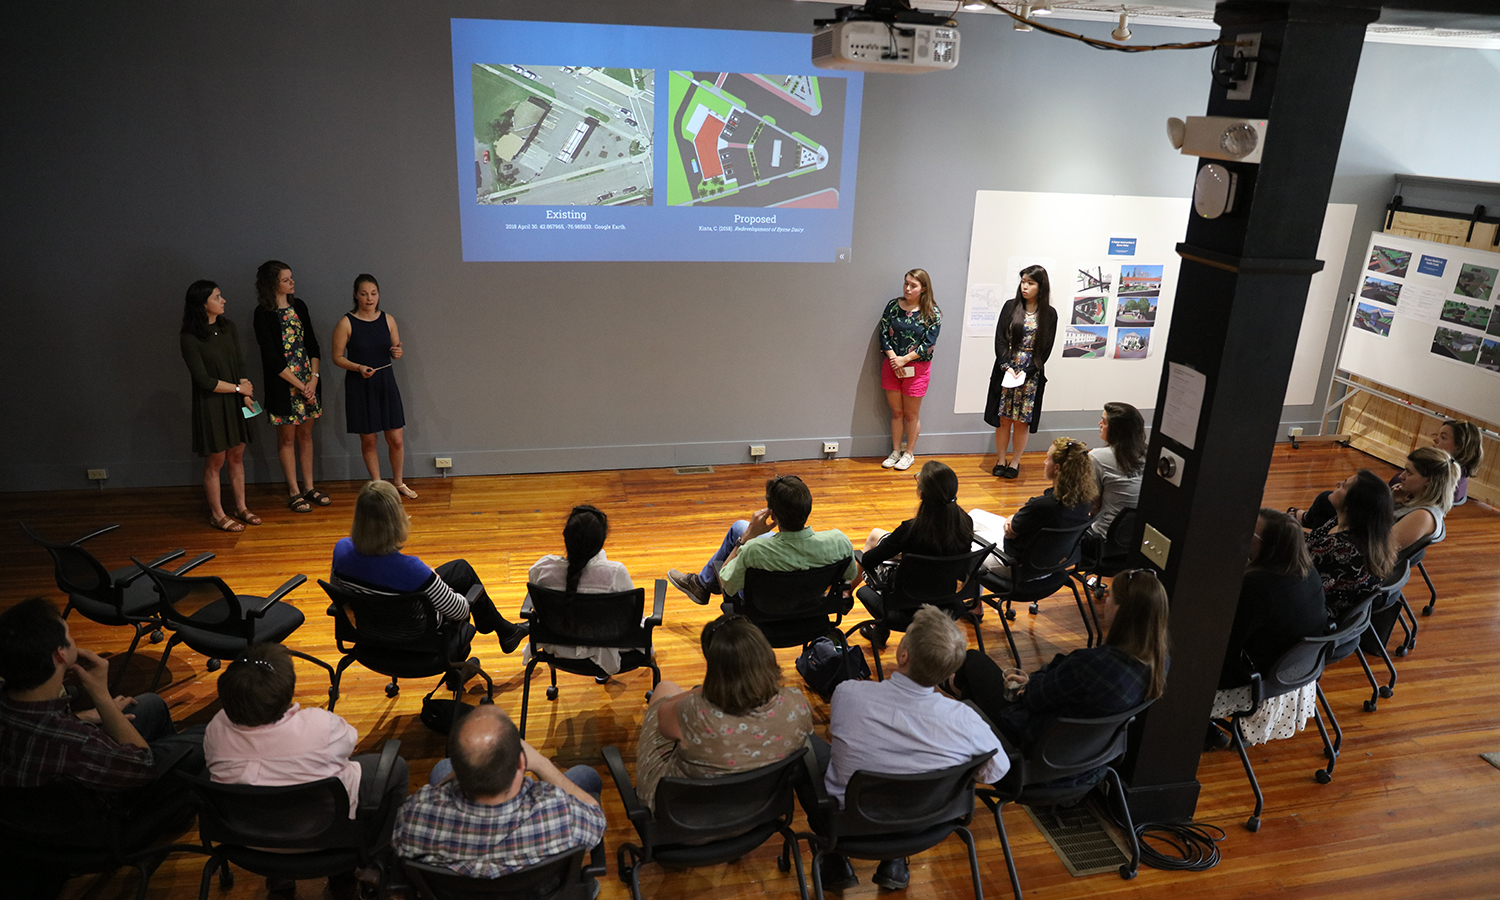 At the Bozzuto Center for Entrepreneurship, students present a sustainability plan for the Castle Street Corridor in downtown Geneva as part of their Sustainable Community Development Capstone.